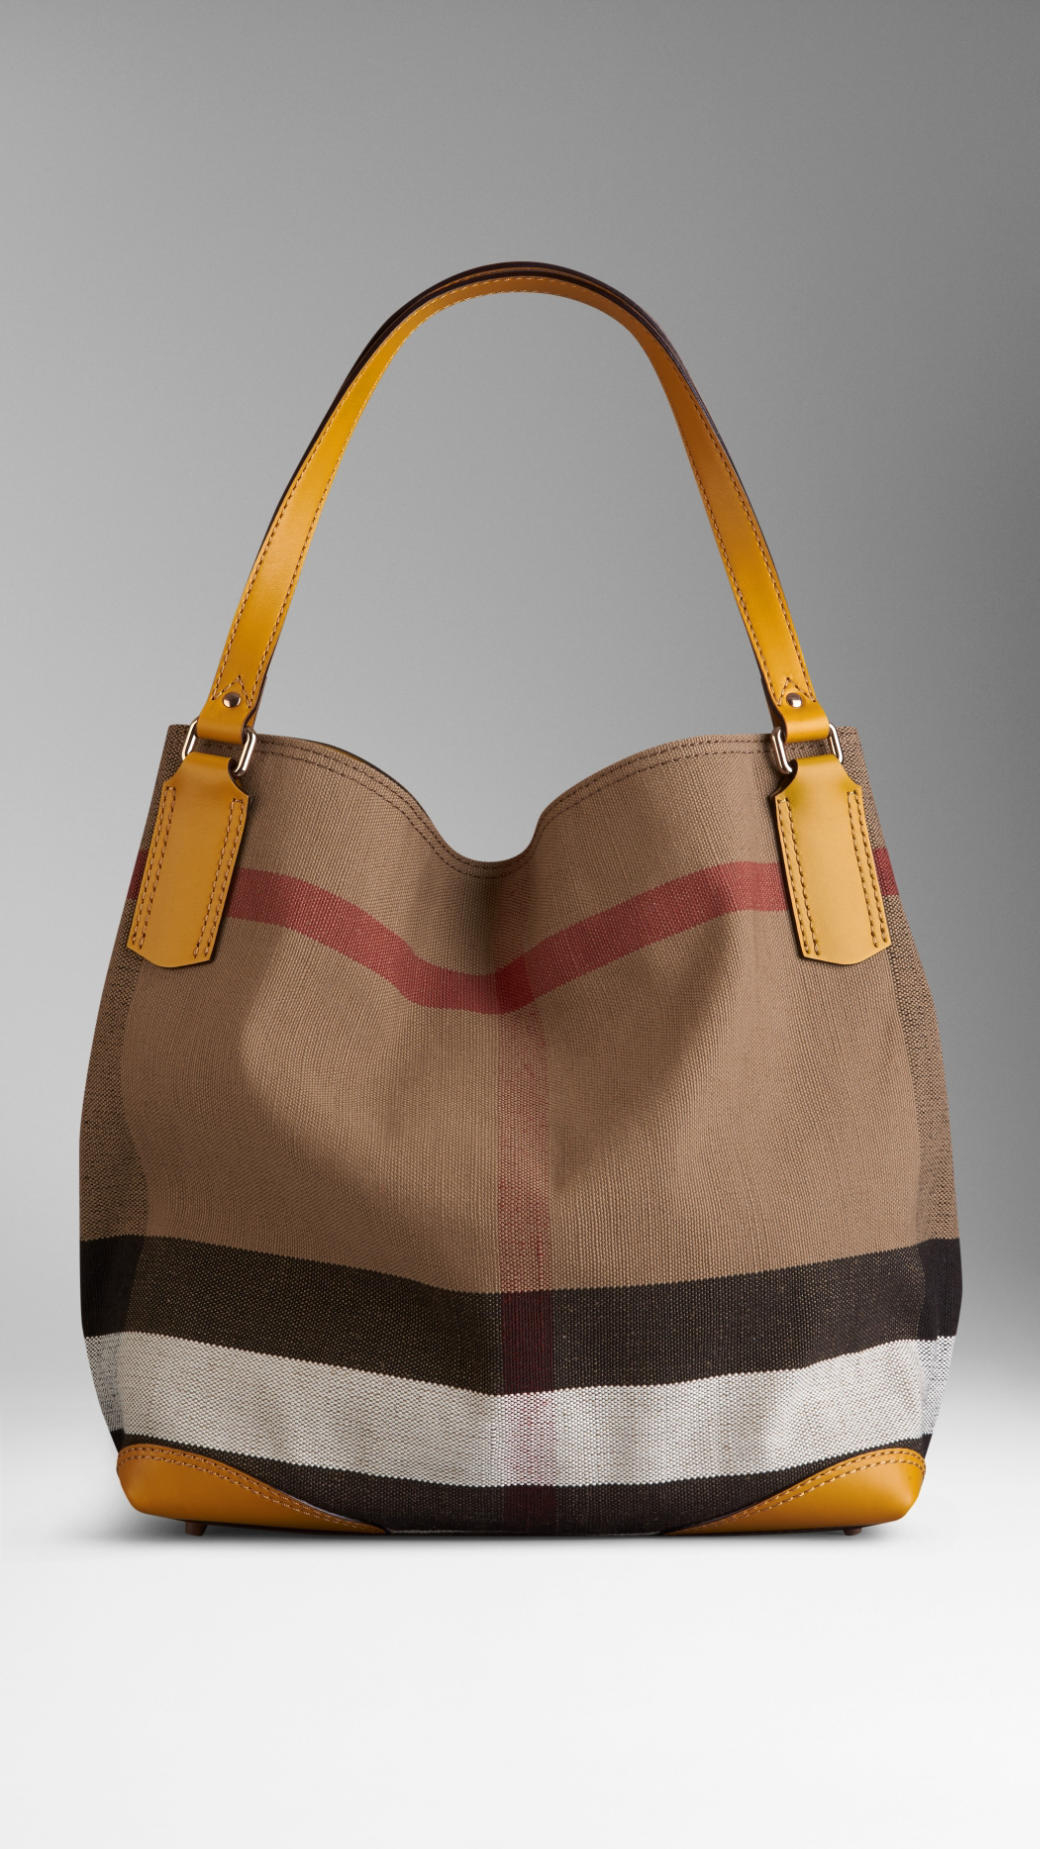 Burberry Medium Canvas Check Tote Bag in Yellow (yellow barley) | Lyst